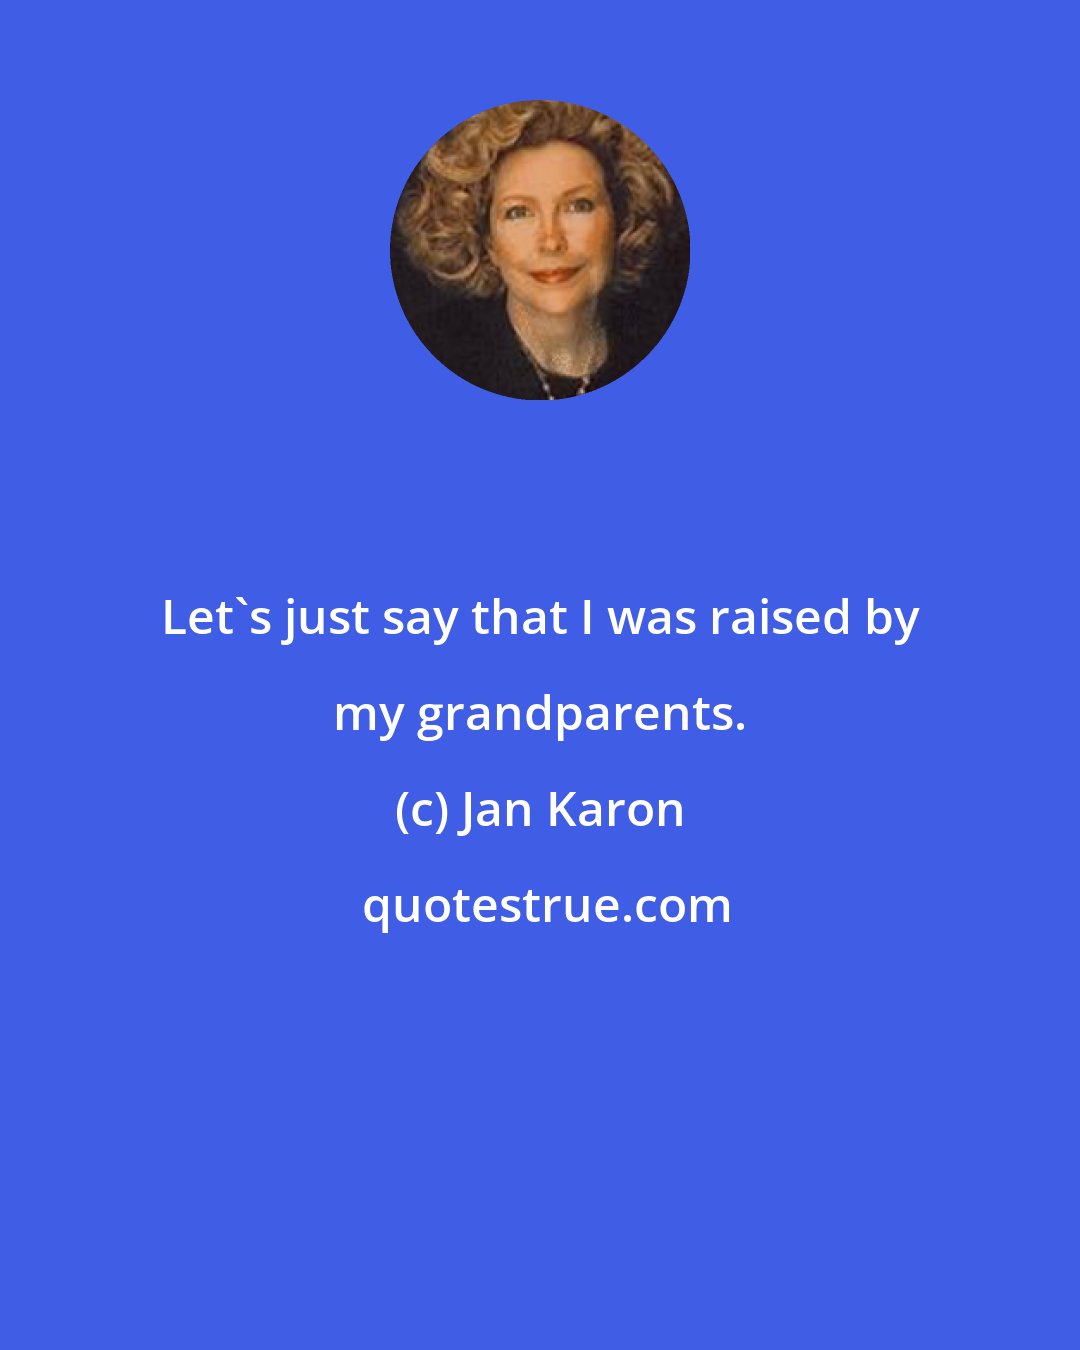 Jan Karon: Let's just say that I was raised by my grandparents.